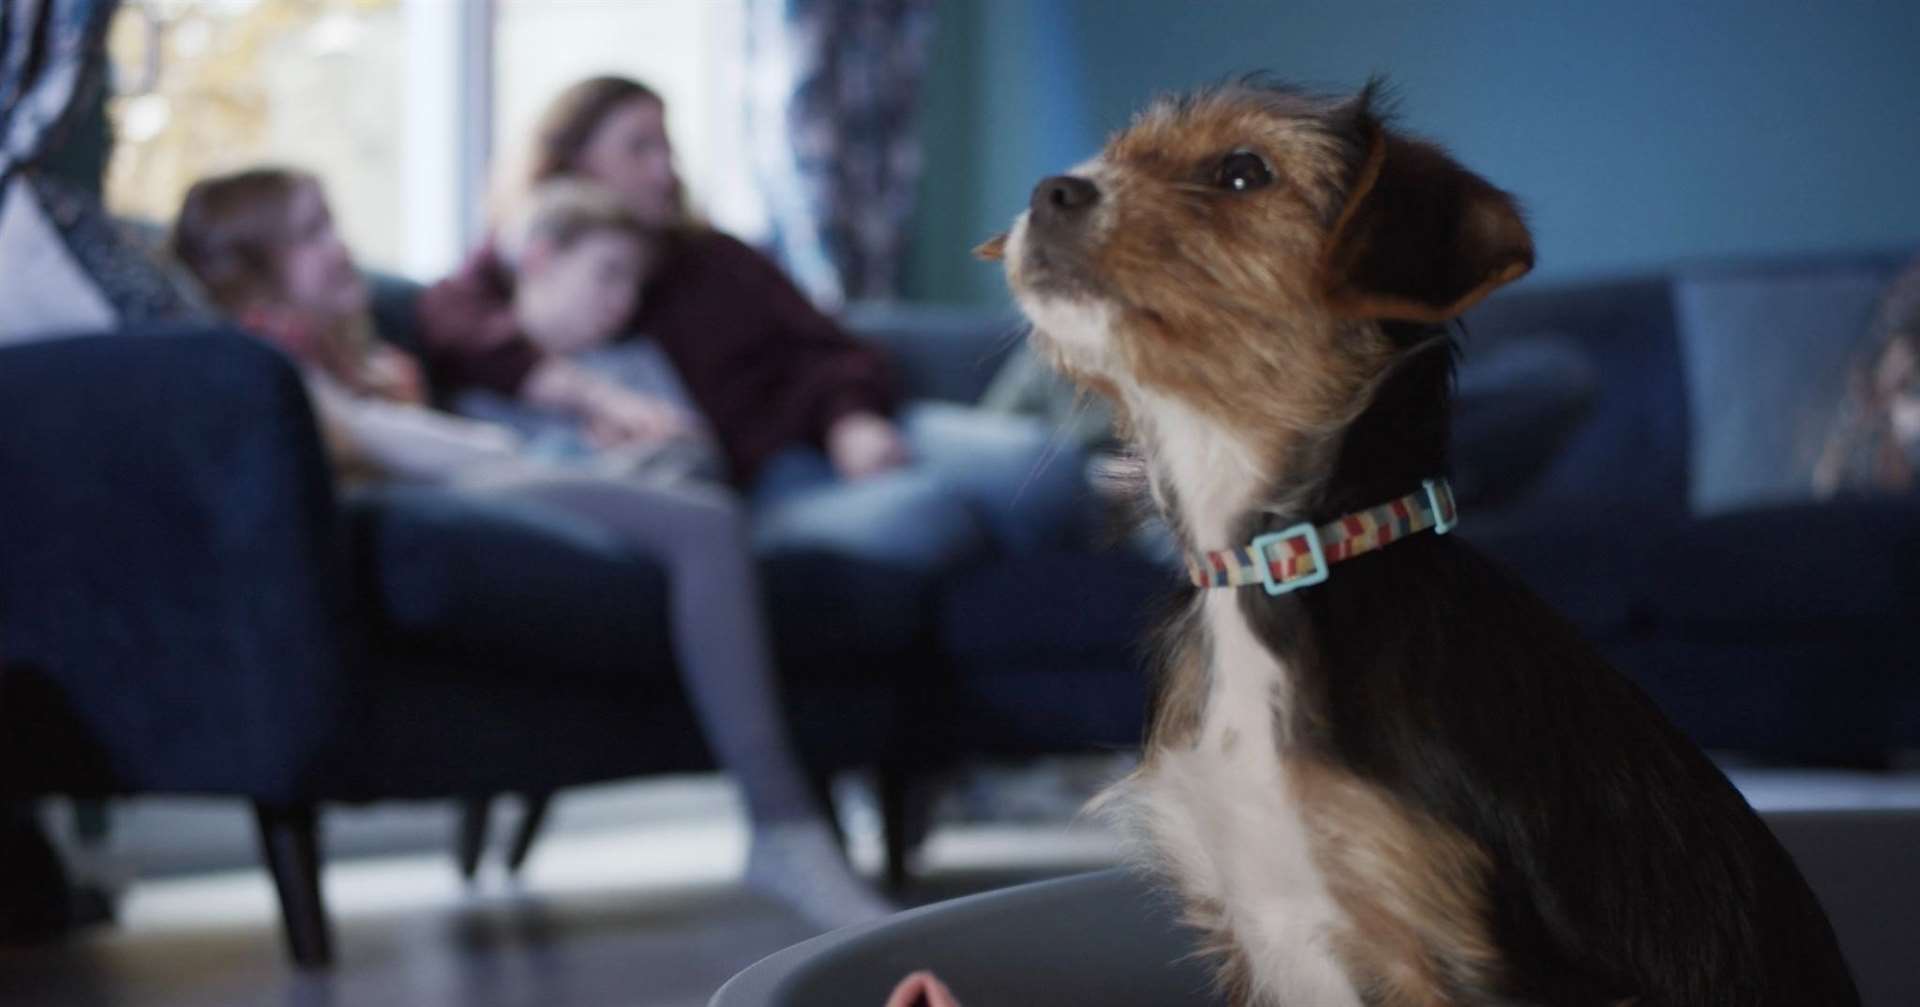 Peanut the puppy, from Tunbridge Wells, appeared in the RSPCA's Christmas video. Picture: RSPCA